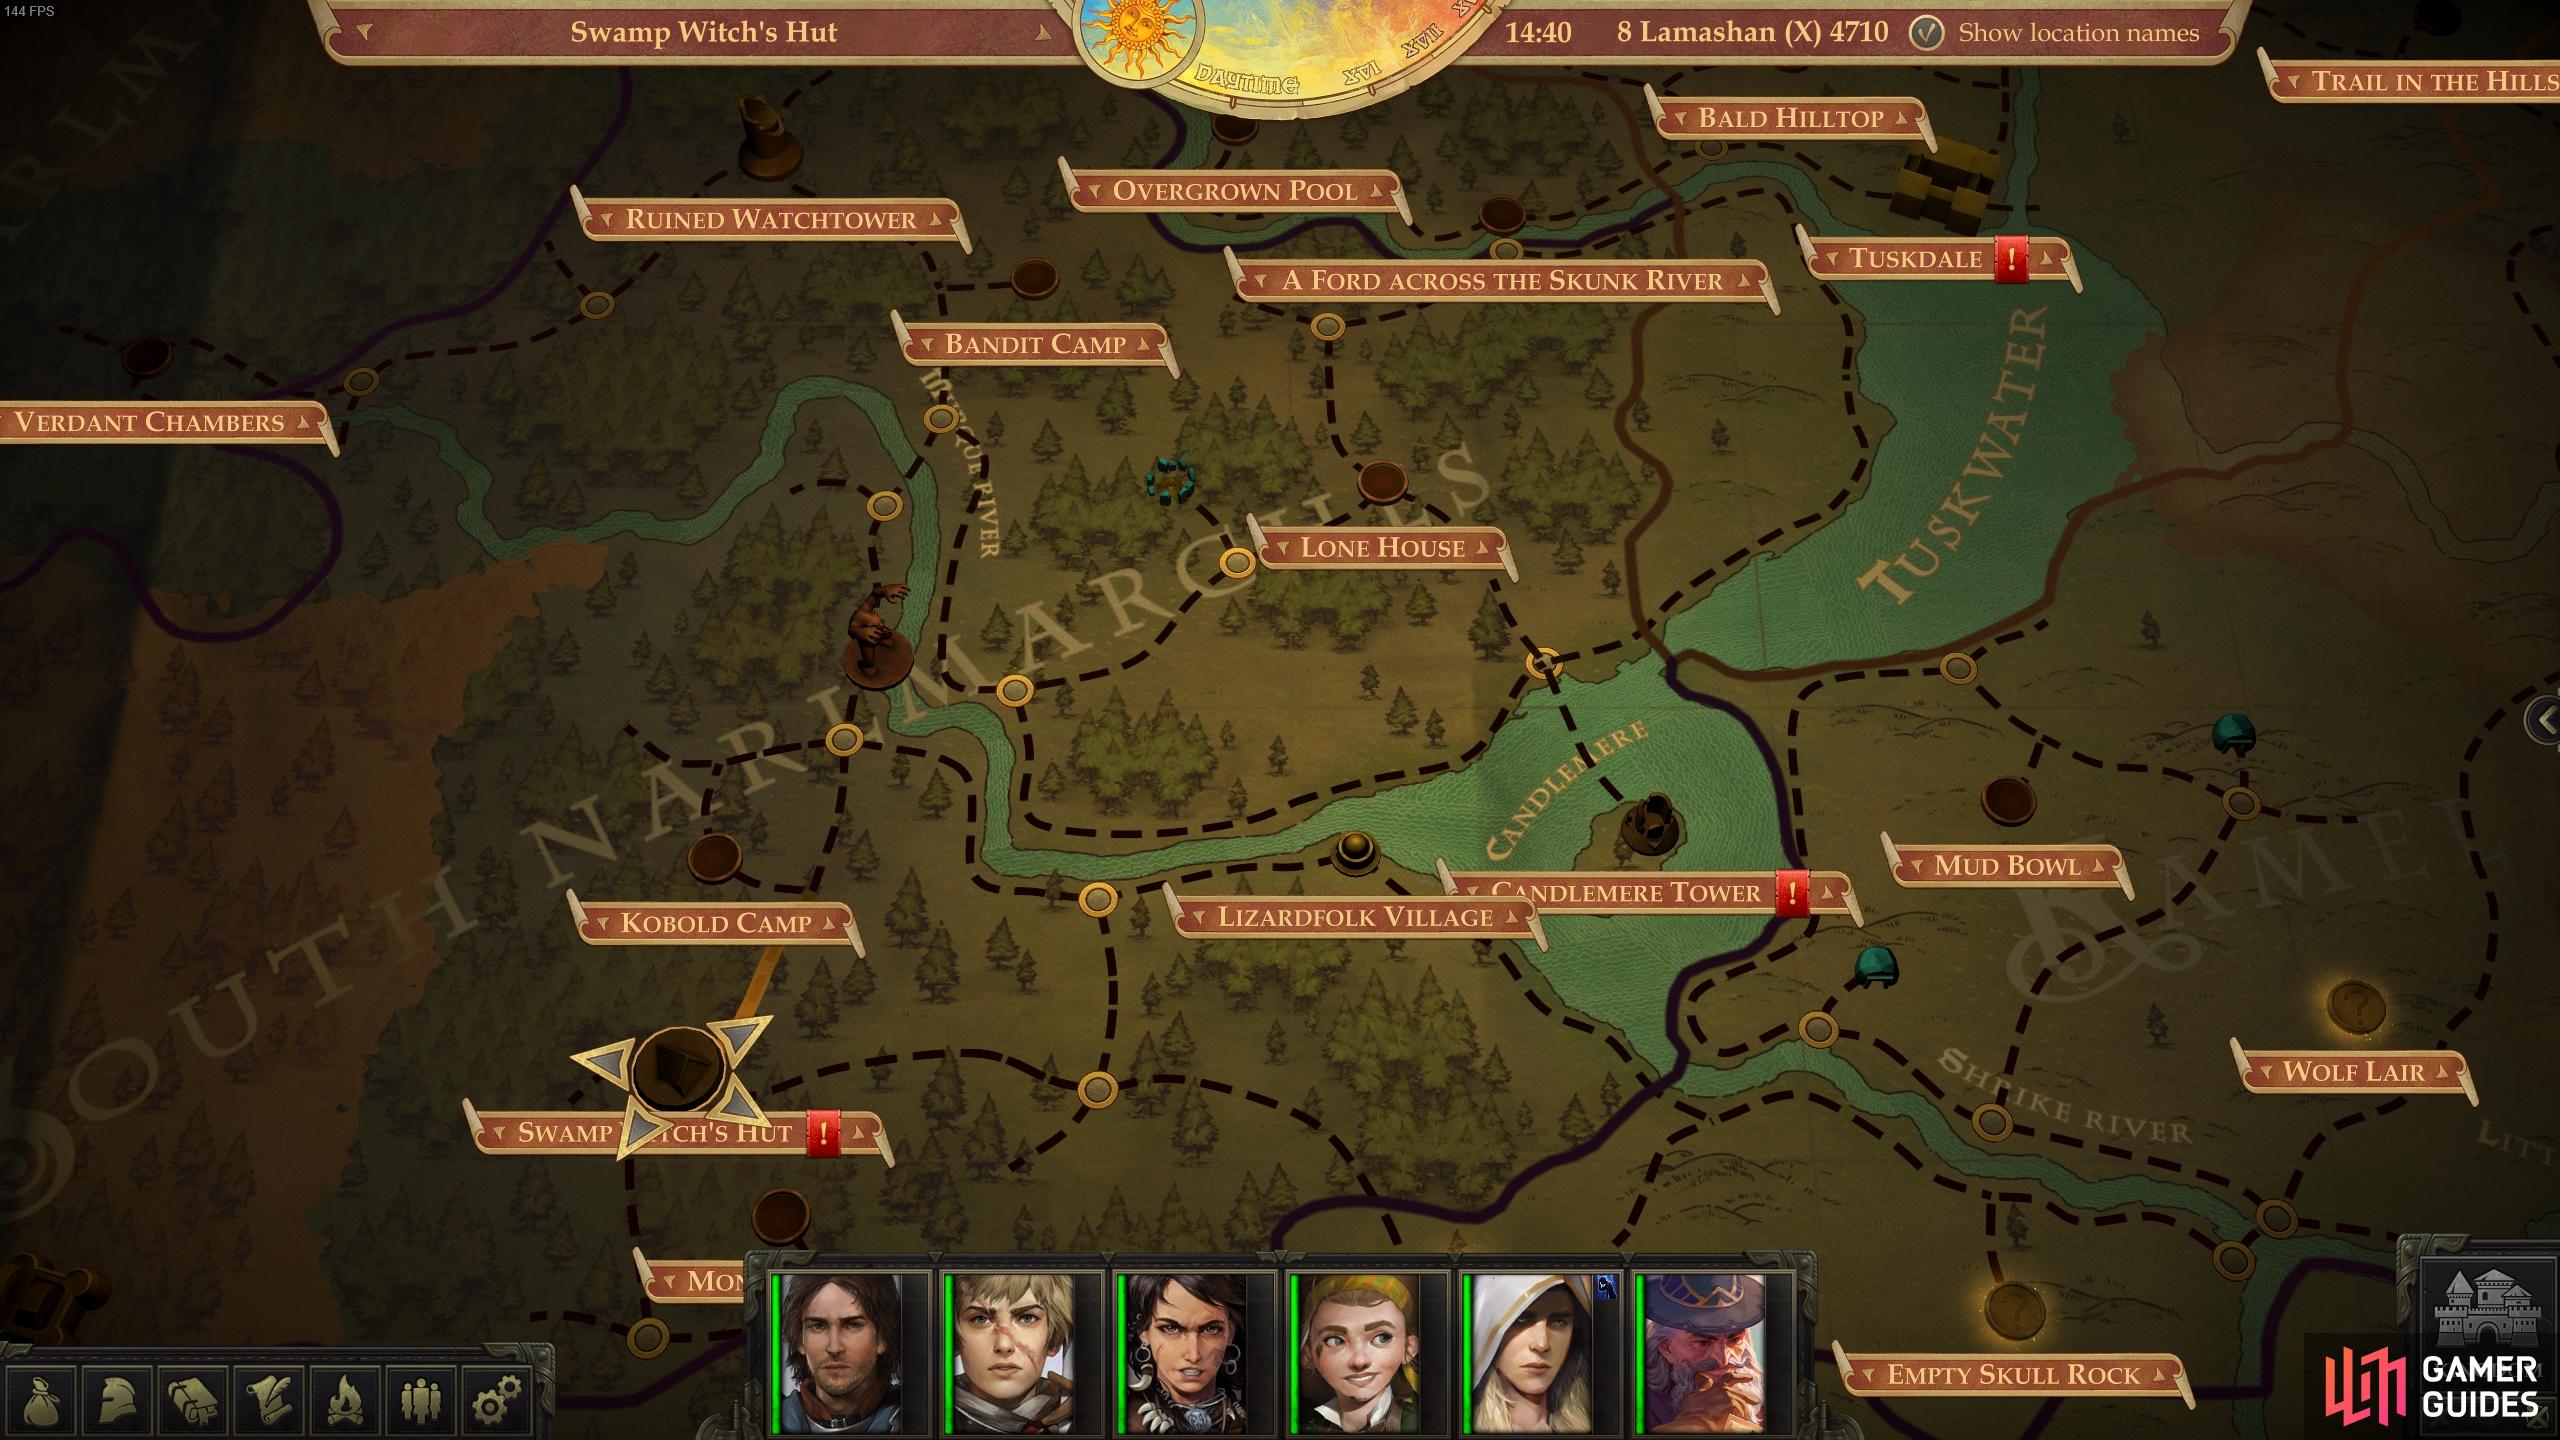 The location of Swamp Witch's Hut (bottom left) in relation to your capital (top right).